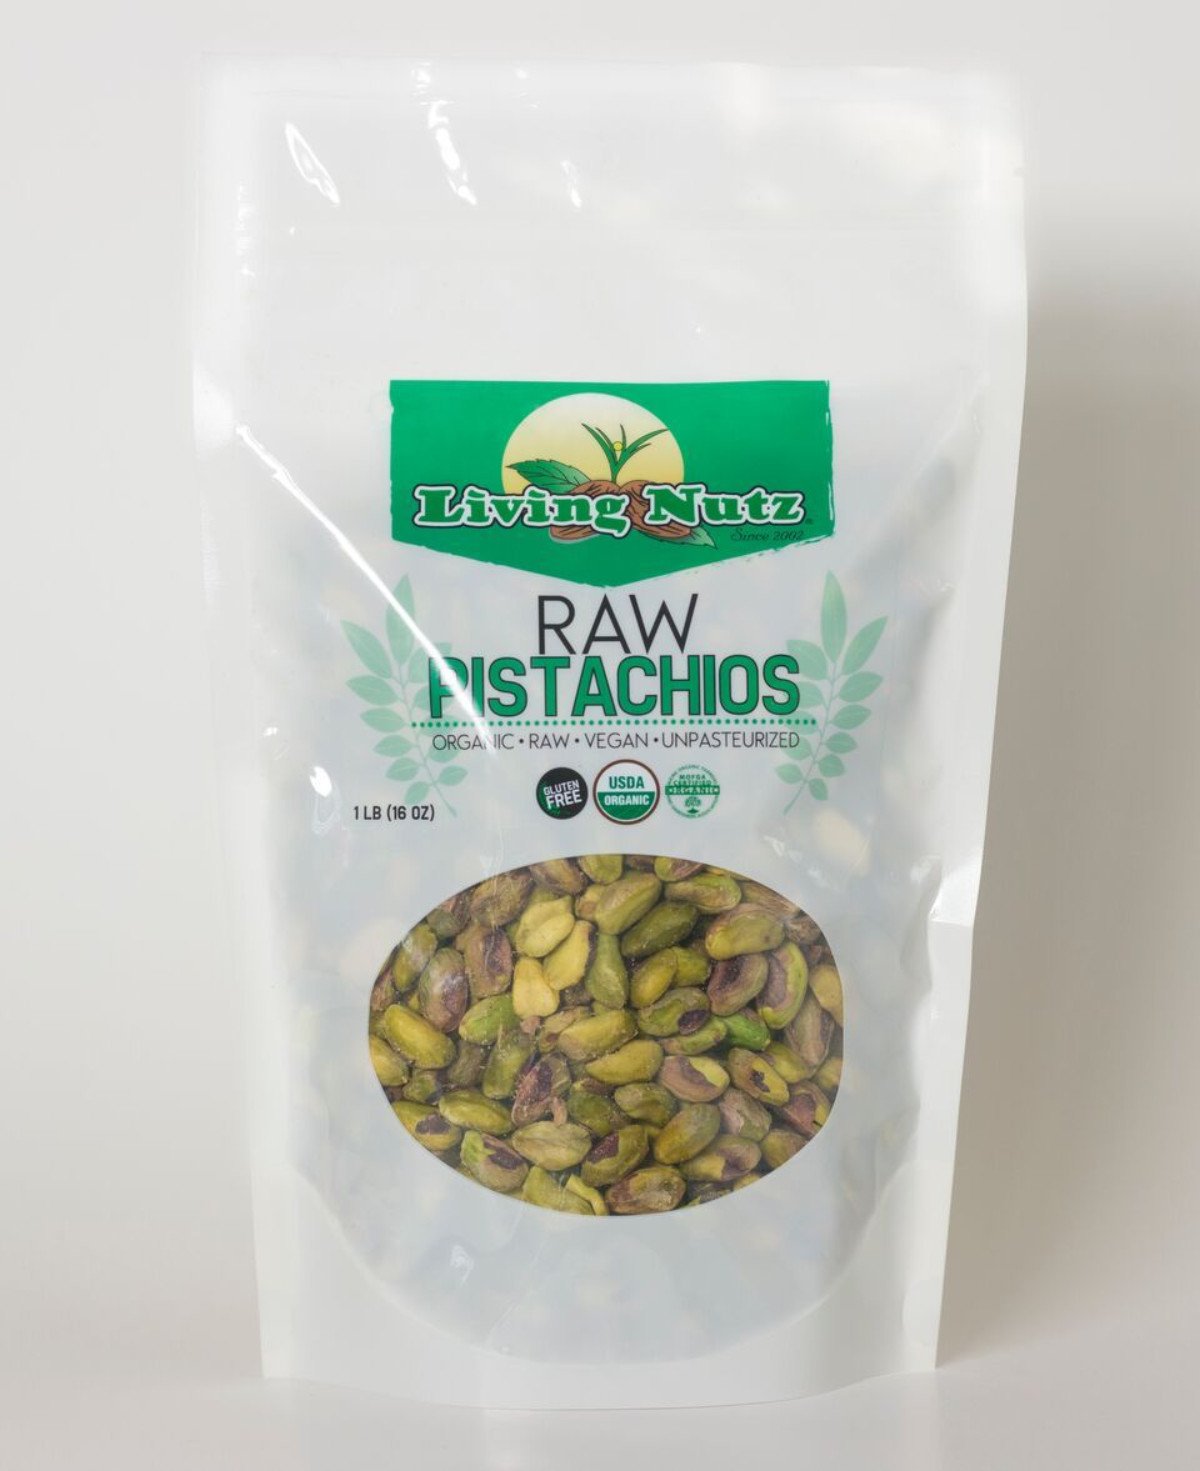 Raw, organic pistachios. Fresh pistachios are healthy nuts